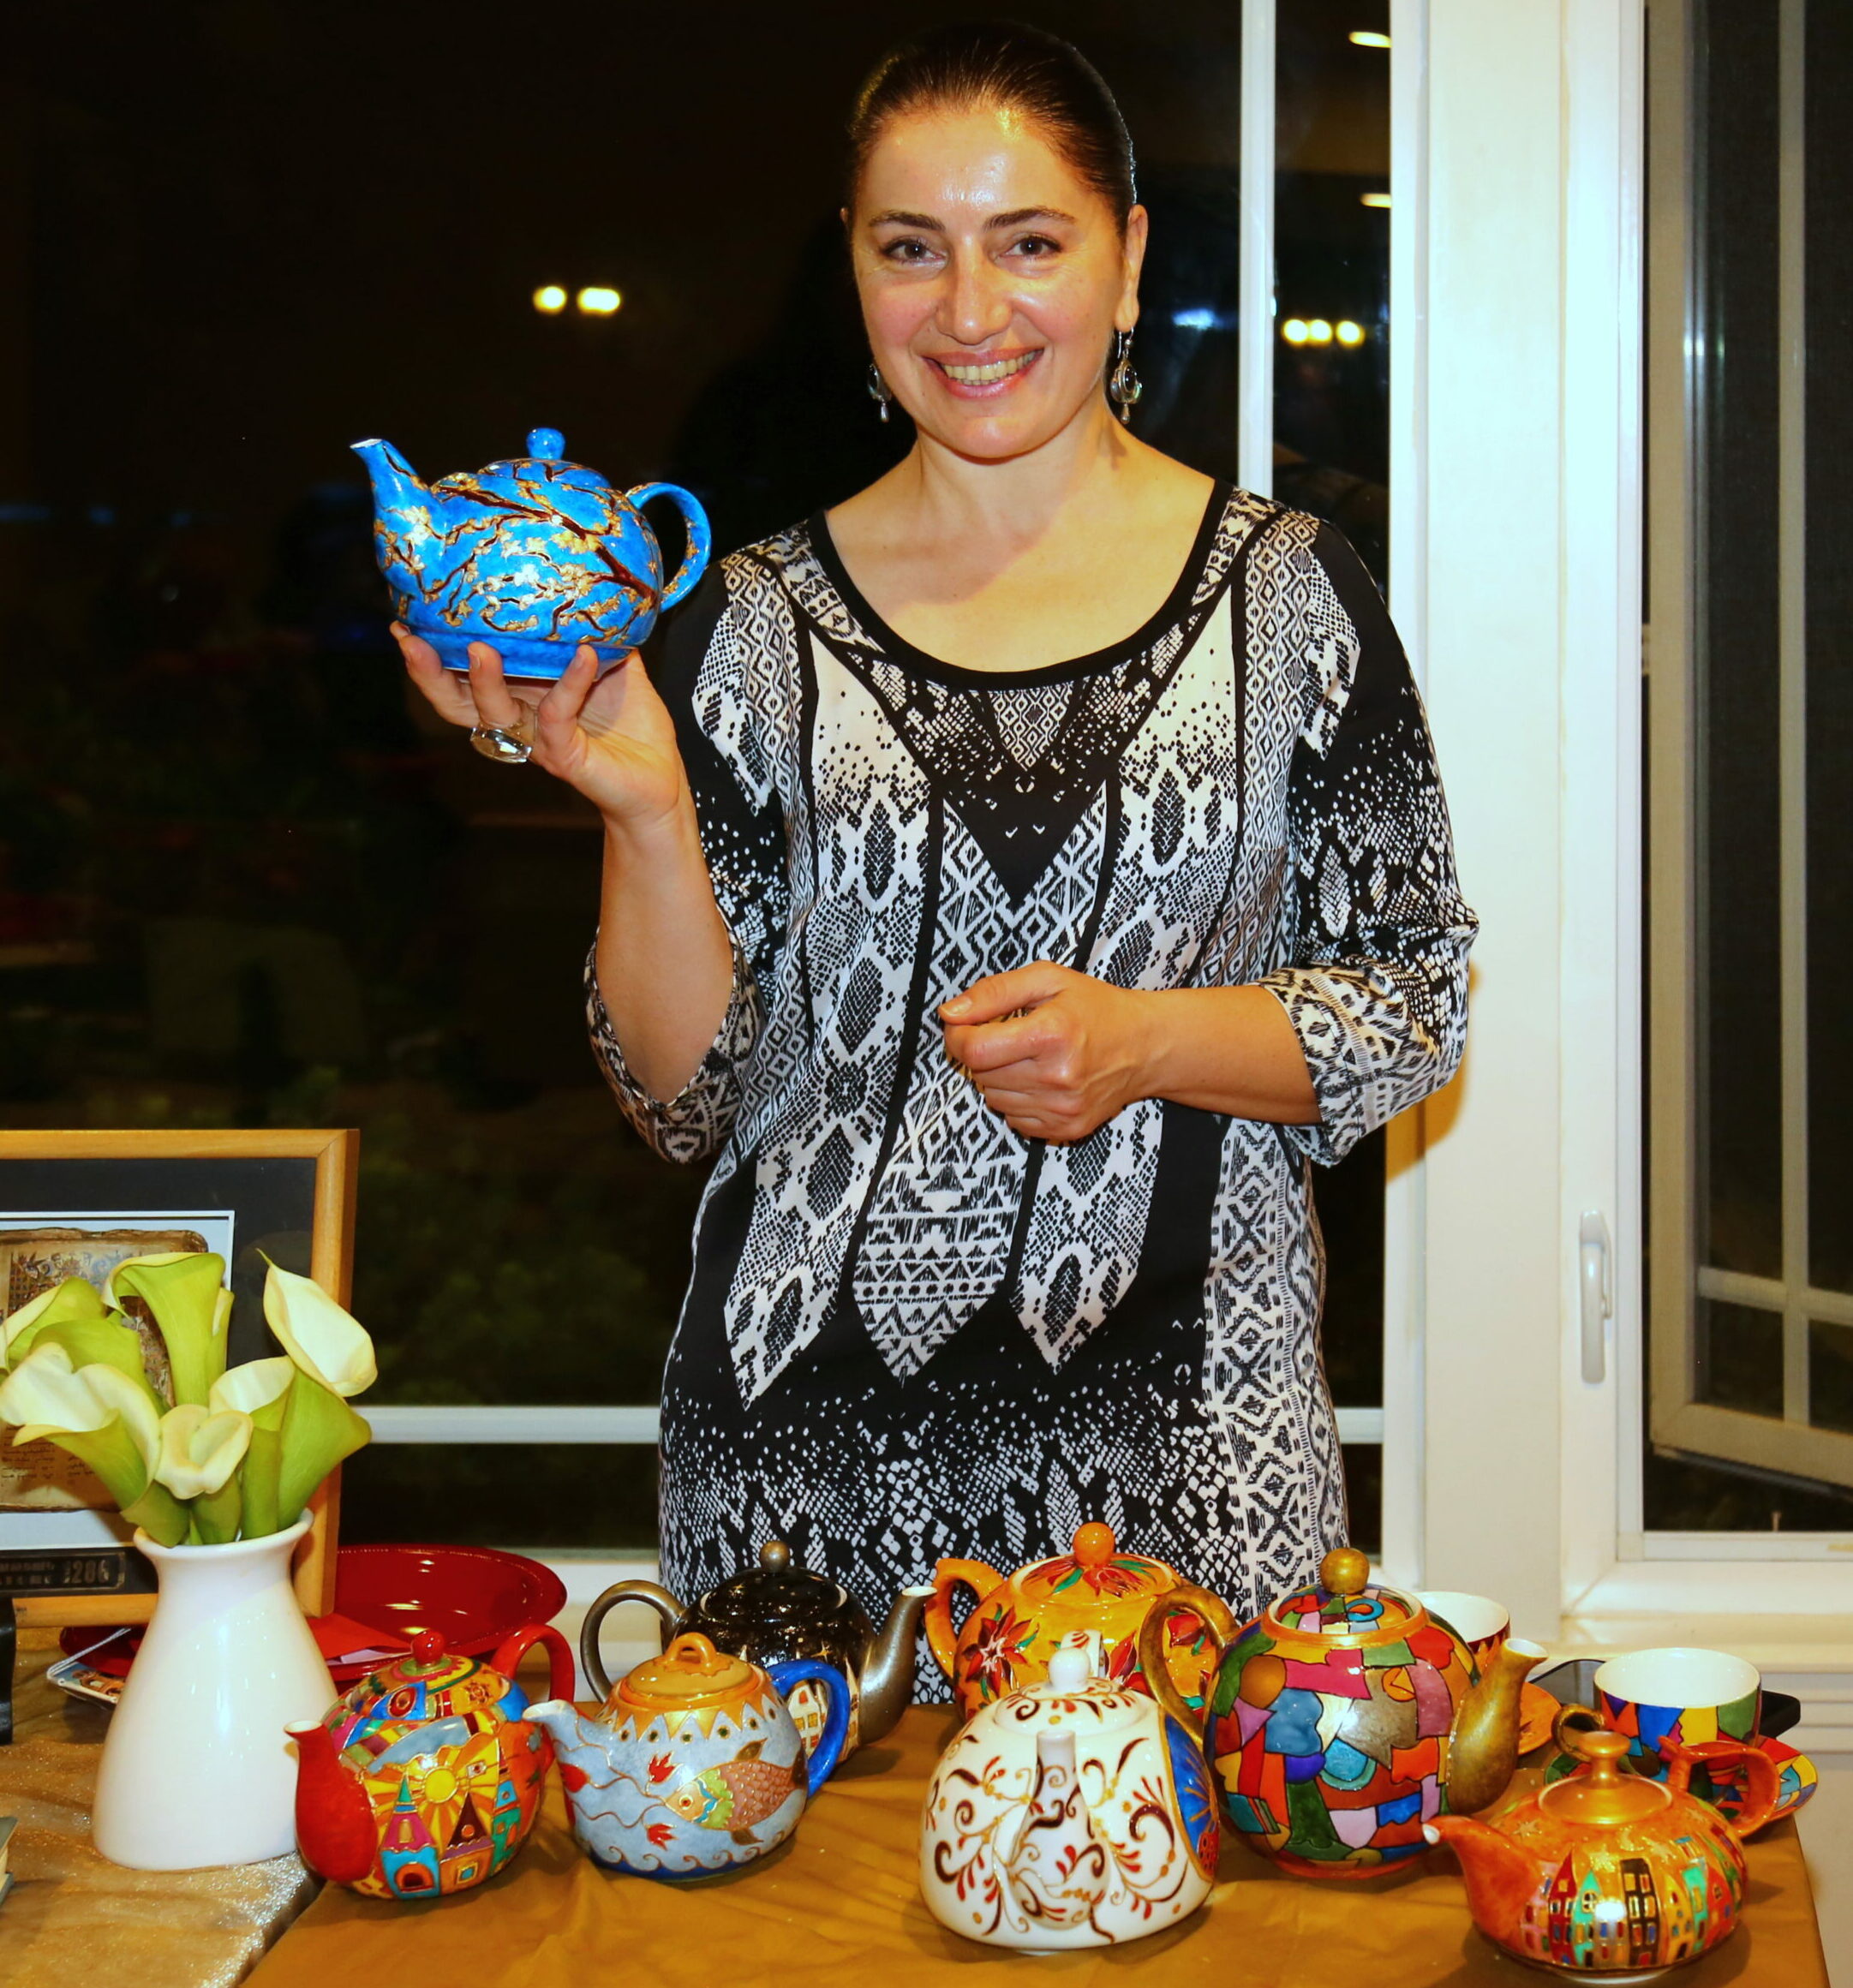 Tamara smiling holding up a blue teapot she made above selling colorful pottery smiling with a black and white dress on.